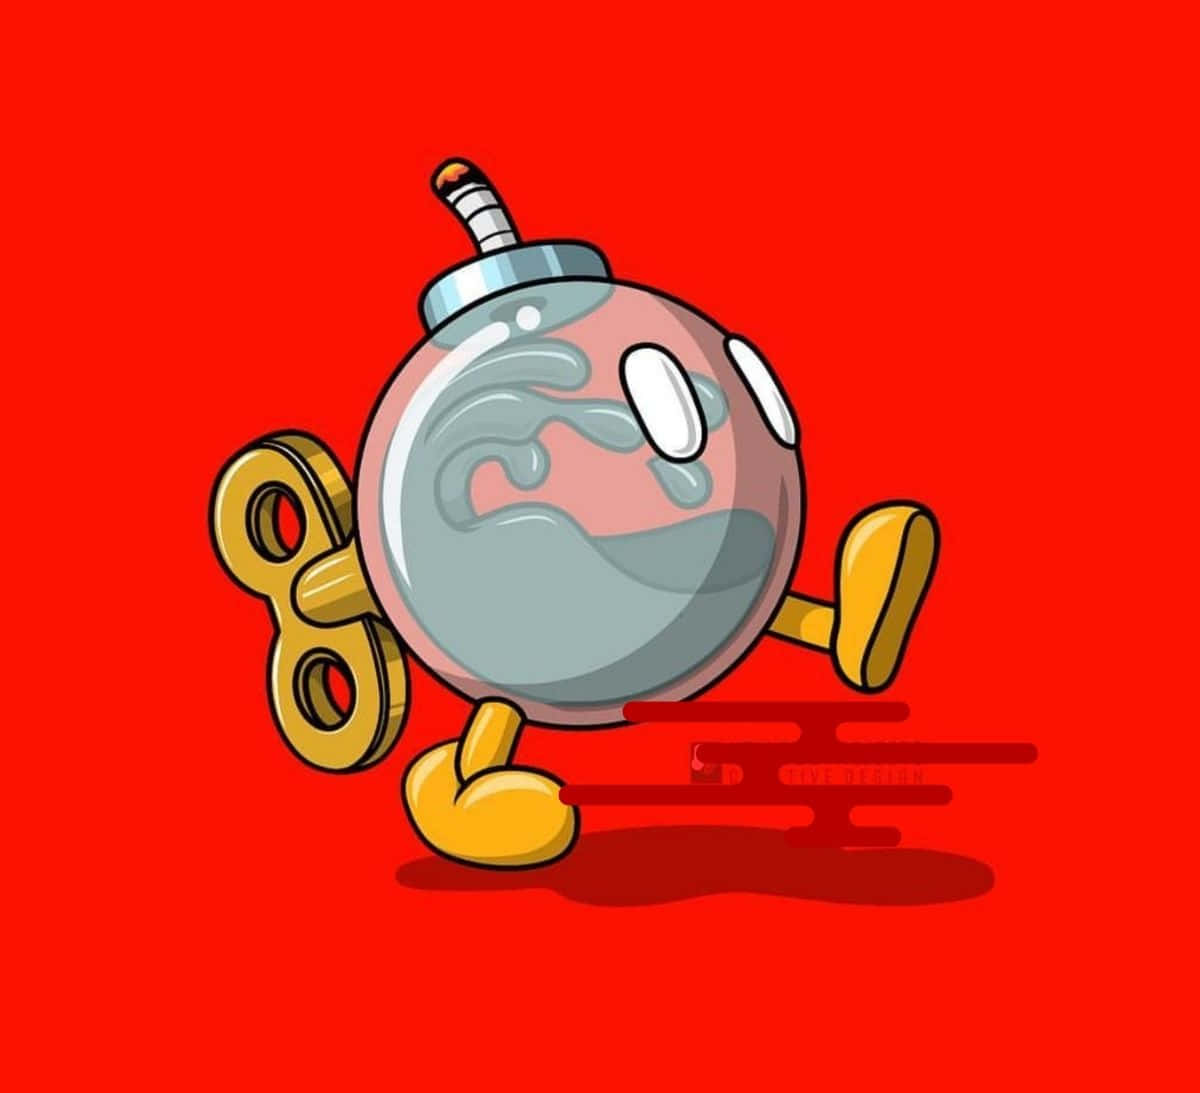 Bob-omb Exploding in Action Wallpaper